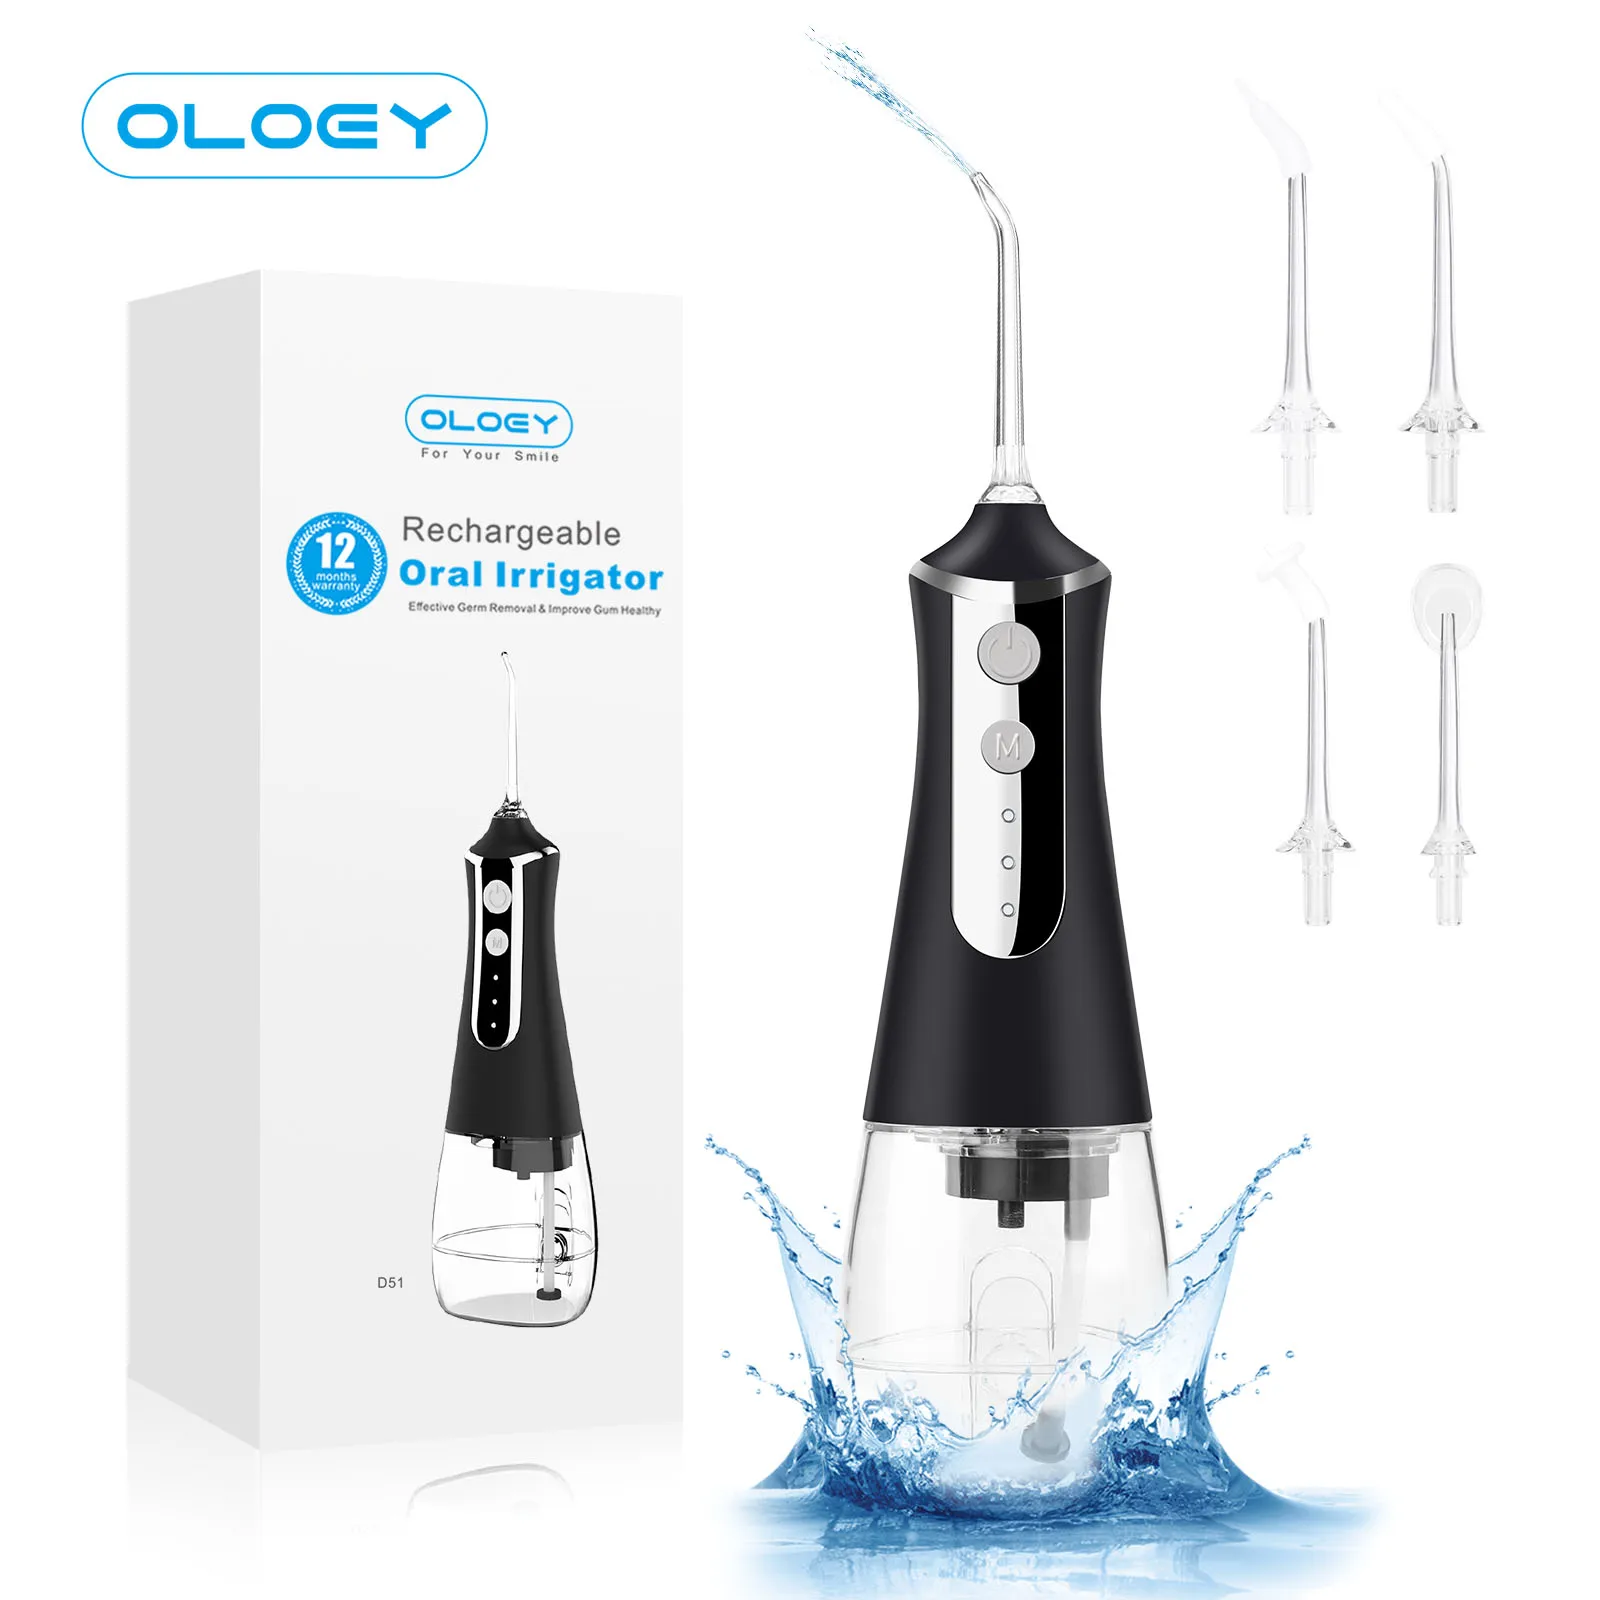 OLOEY Portable Oral Irrigator 3 Modes Water Flosser USB Rechargeable 5 Nozzles Dental Water Jet 300ml Water Tank IPX7 Waterproof